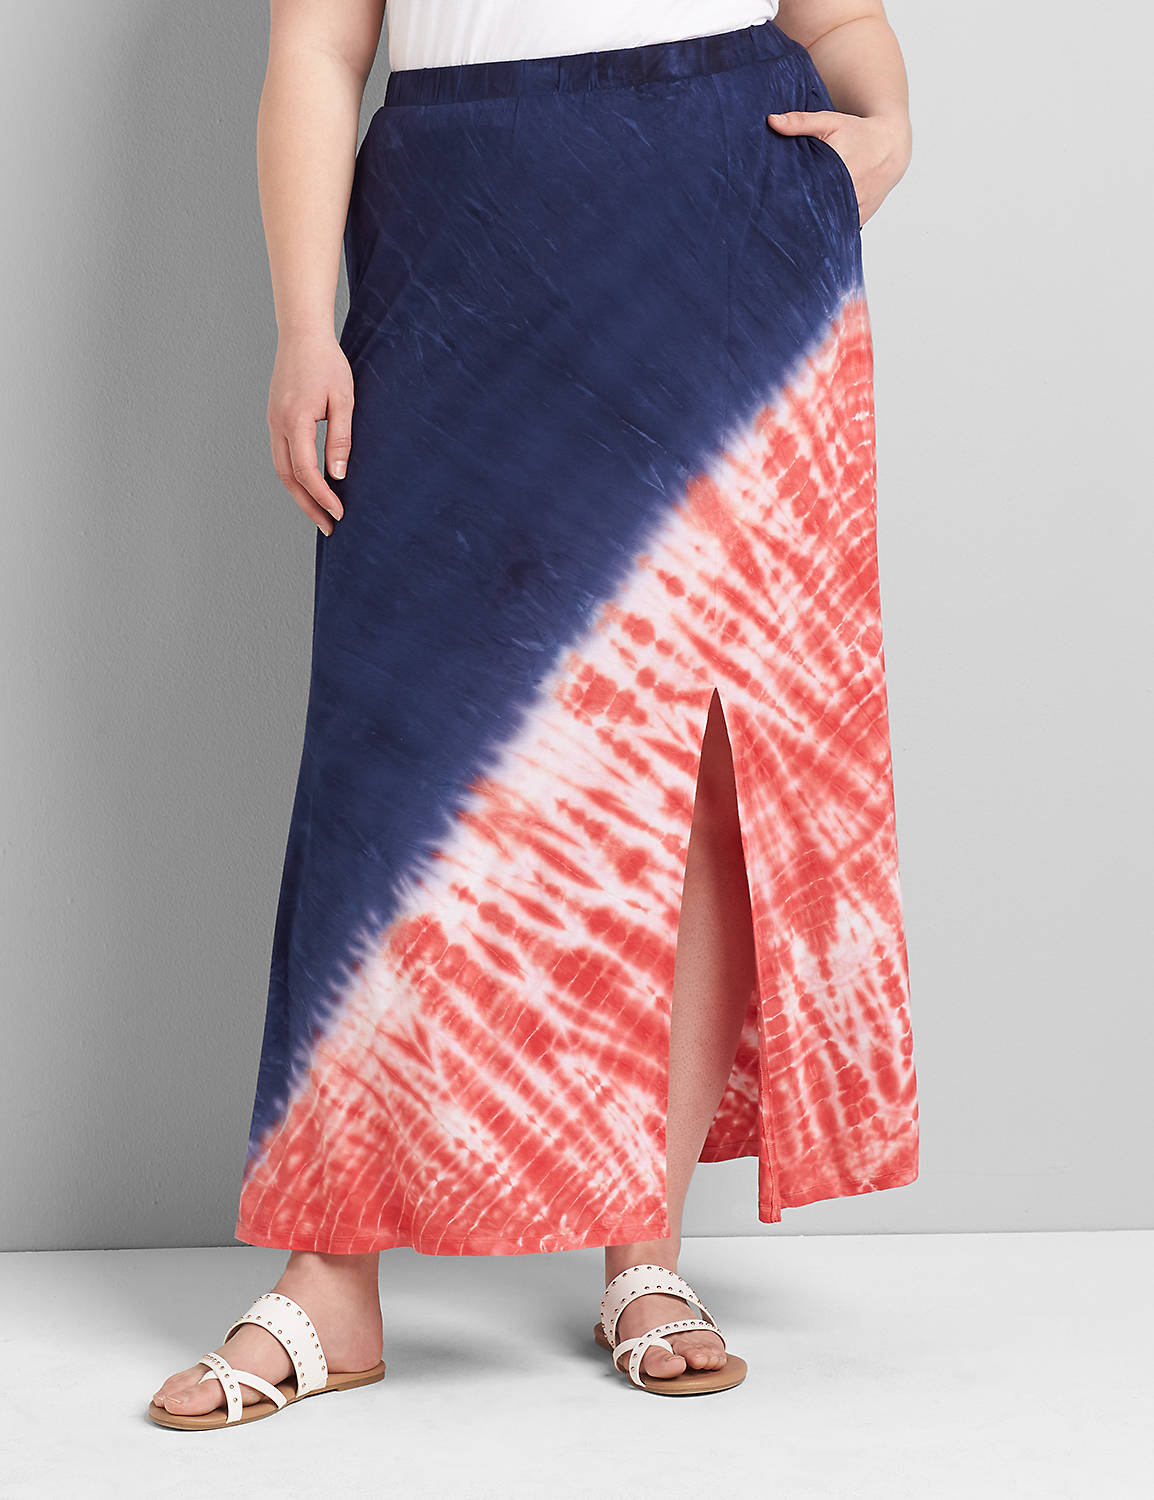 Tie-Dye Maxi Skirt Product Image 1